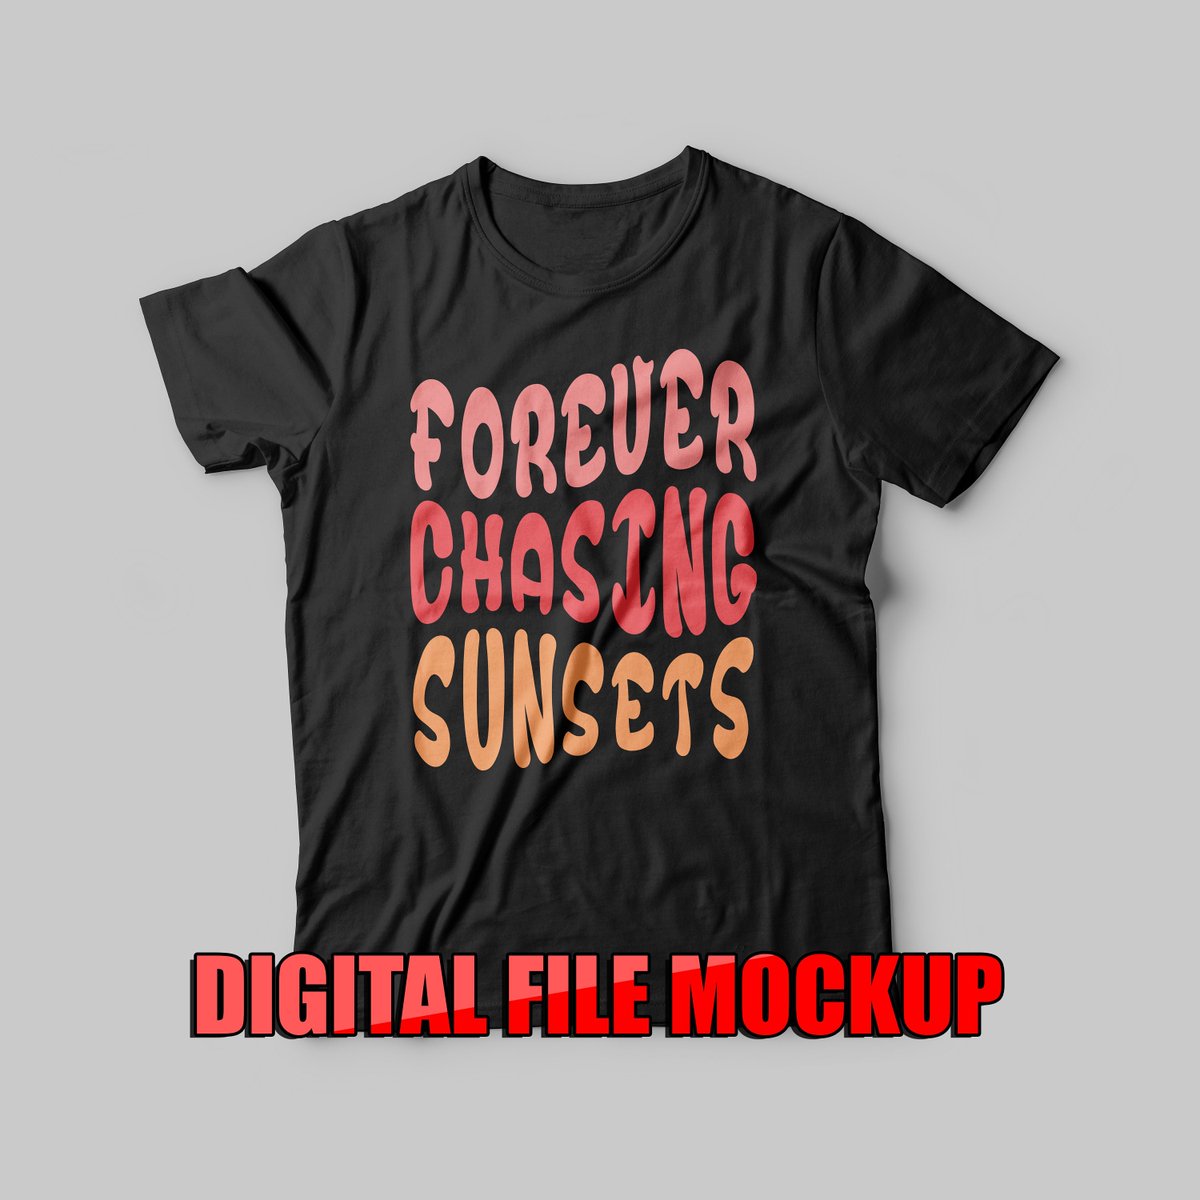 Forever Chasing Sunsets Beach T-shirt Screen-print Digital Download File etsy.me/3Y2Ka9O #foreverchasingsunsets #beachshirt #sunset #beachsunset #screenprintingfile #screenprinting #pngfiles